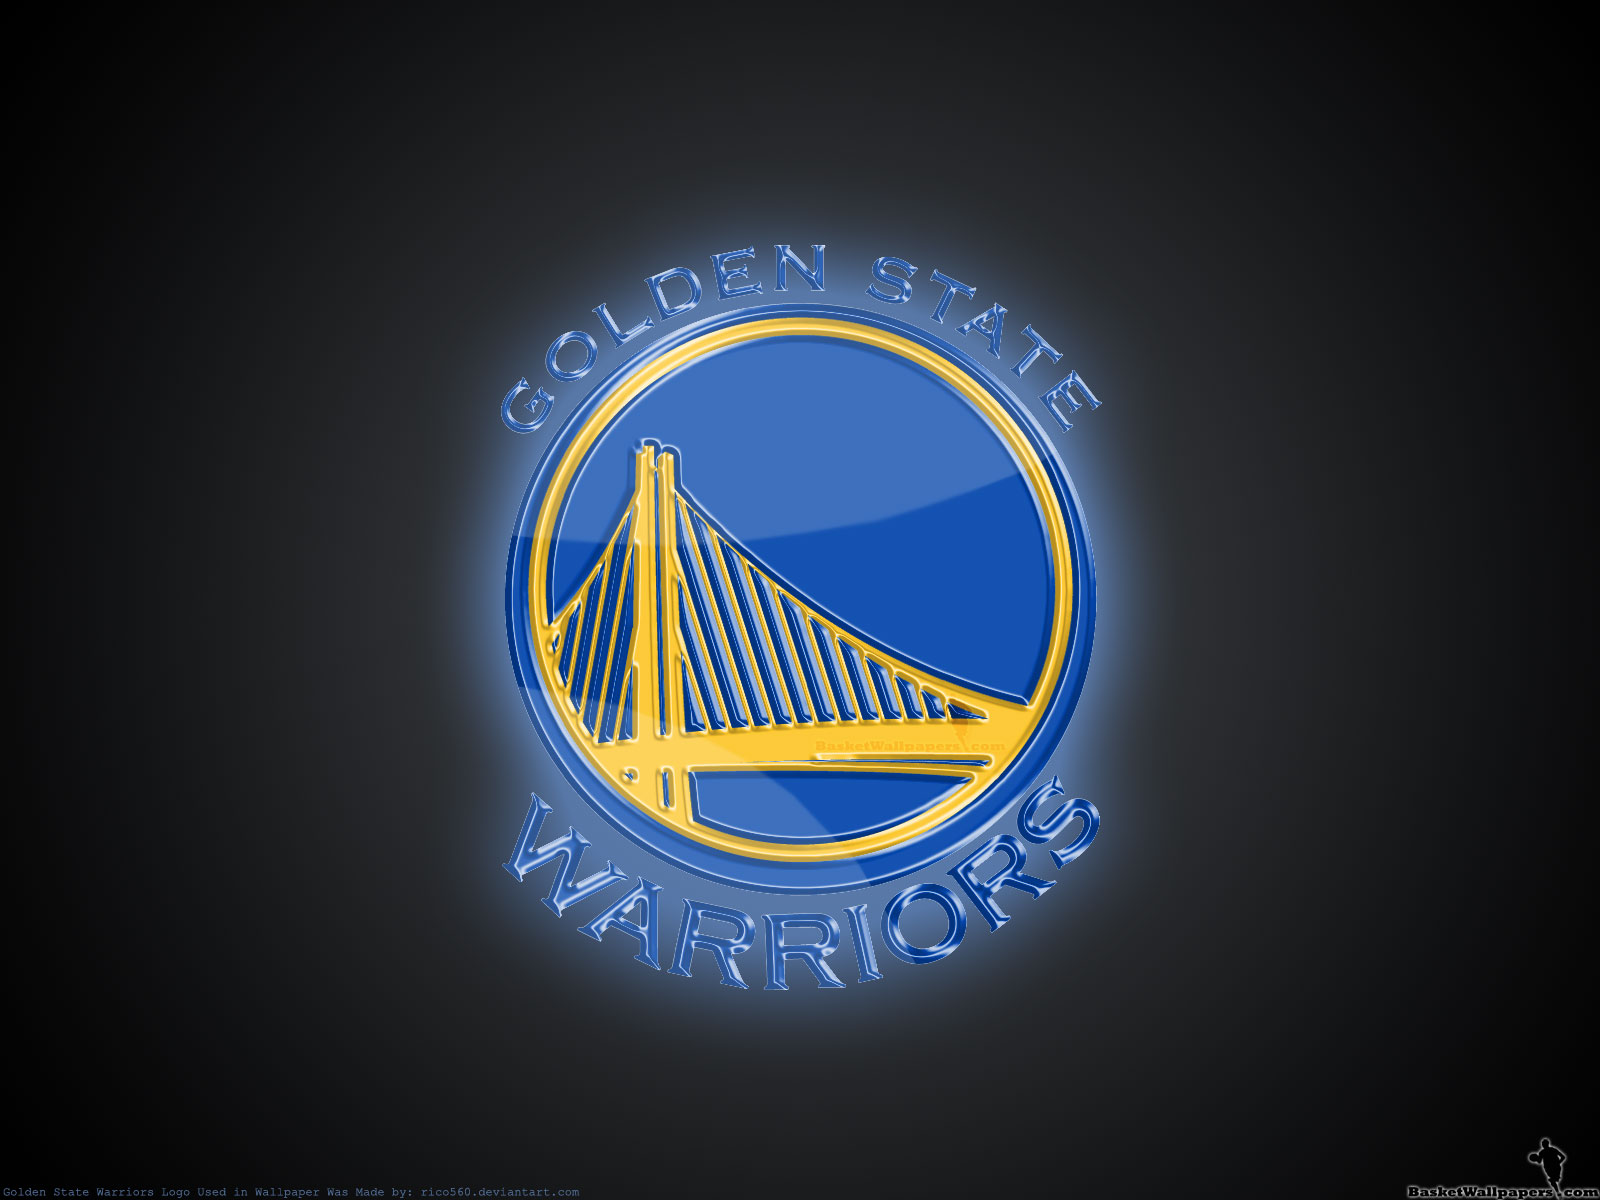 Golden State Warriors The Official Site Of